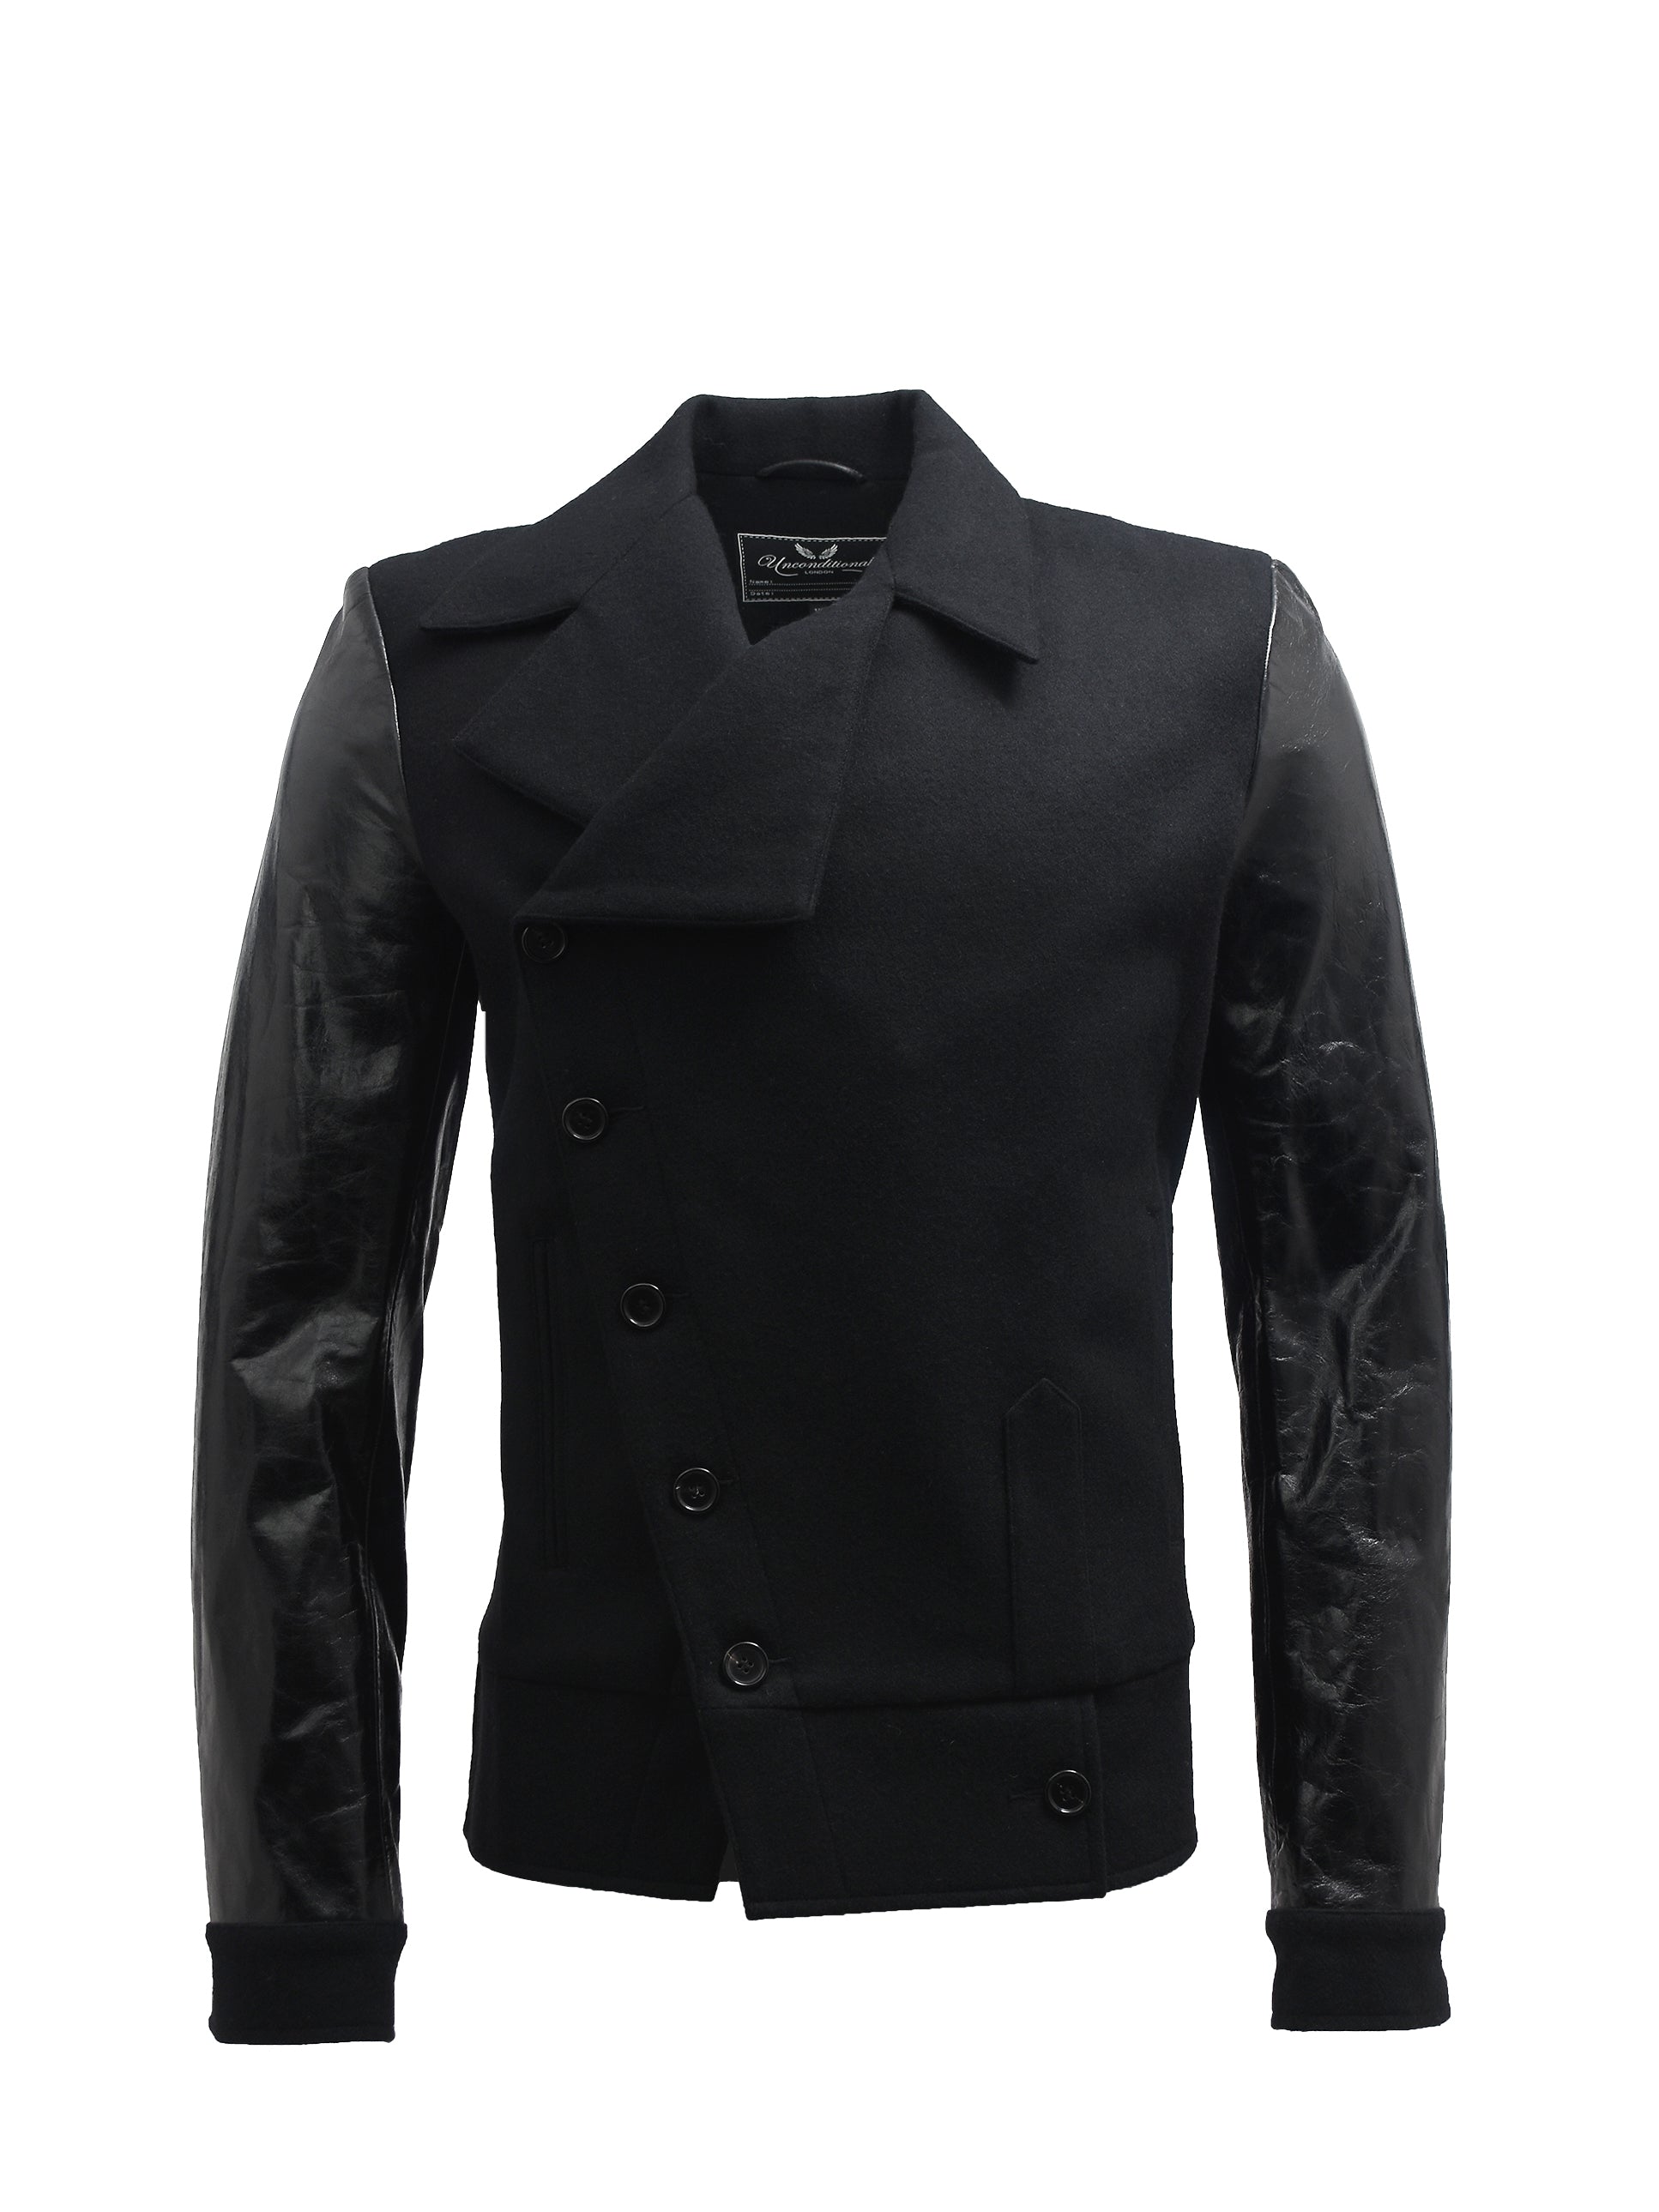 BLACK WOOL BUTTON UP JACKET